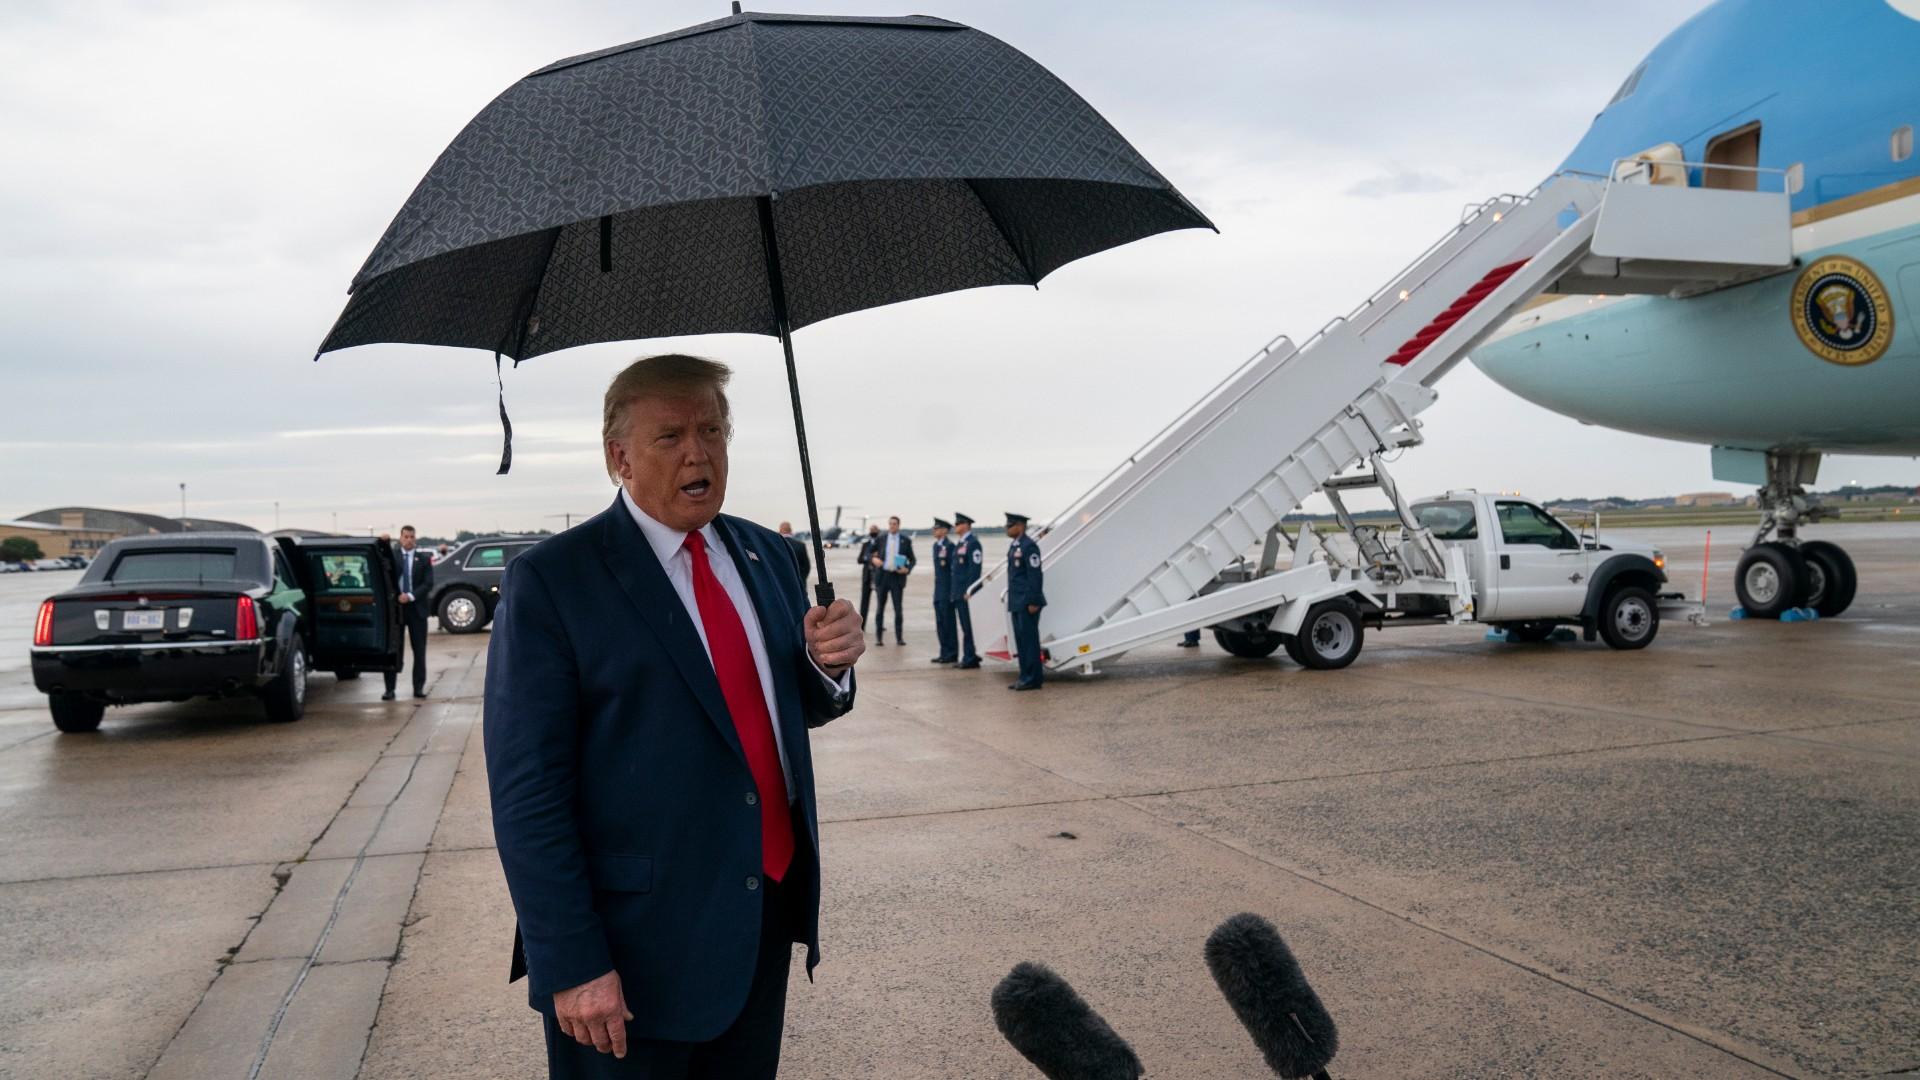 President Donald Trump speaks to reporters at Andrews Air Force Base, Md., as he returns from campaign stops in Florida and Georgia Friday, Sept. 25, 2020. (AP Photo / Evan Vucci)